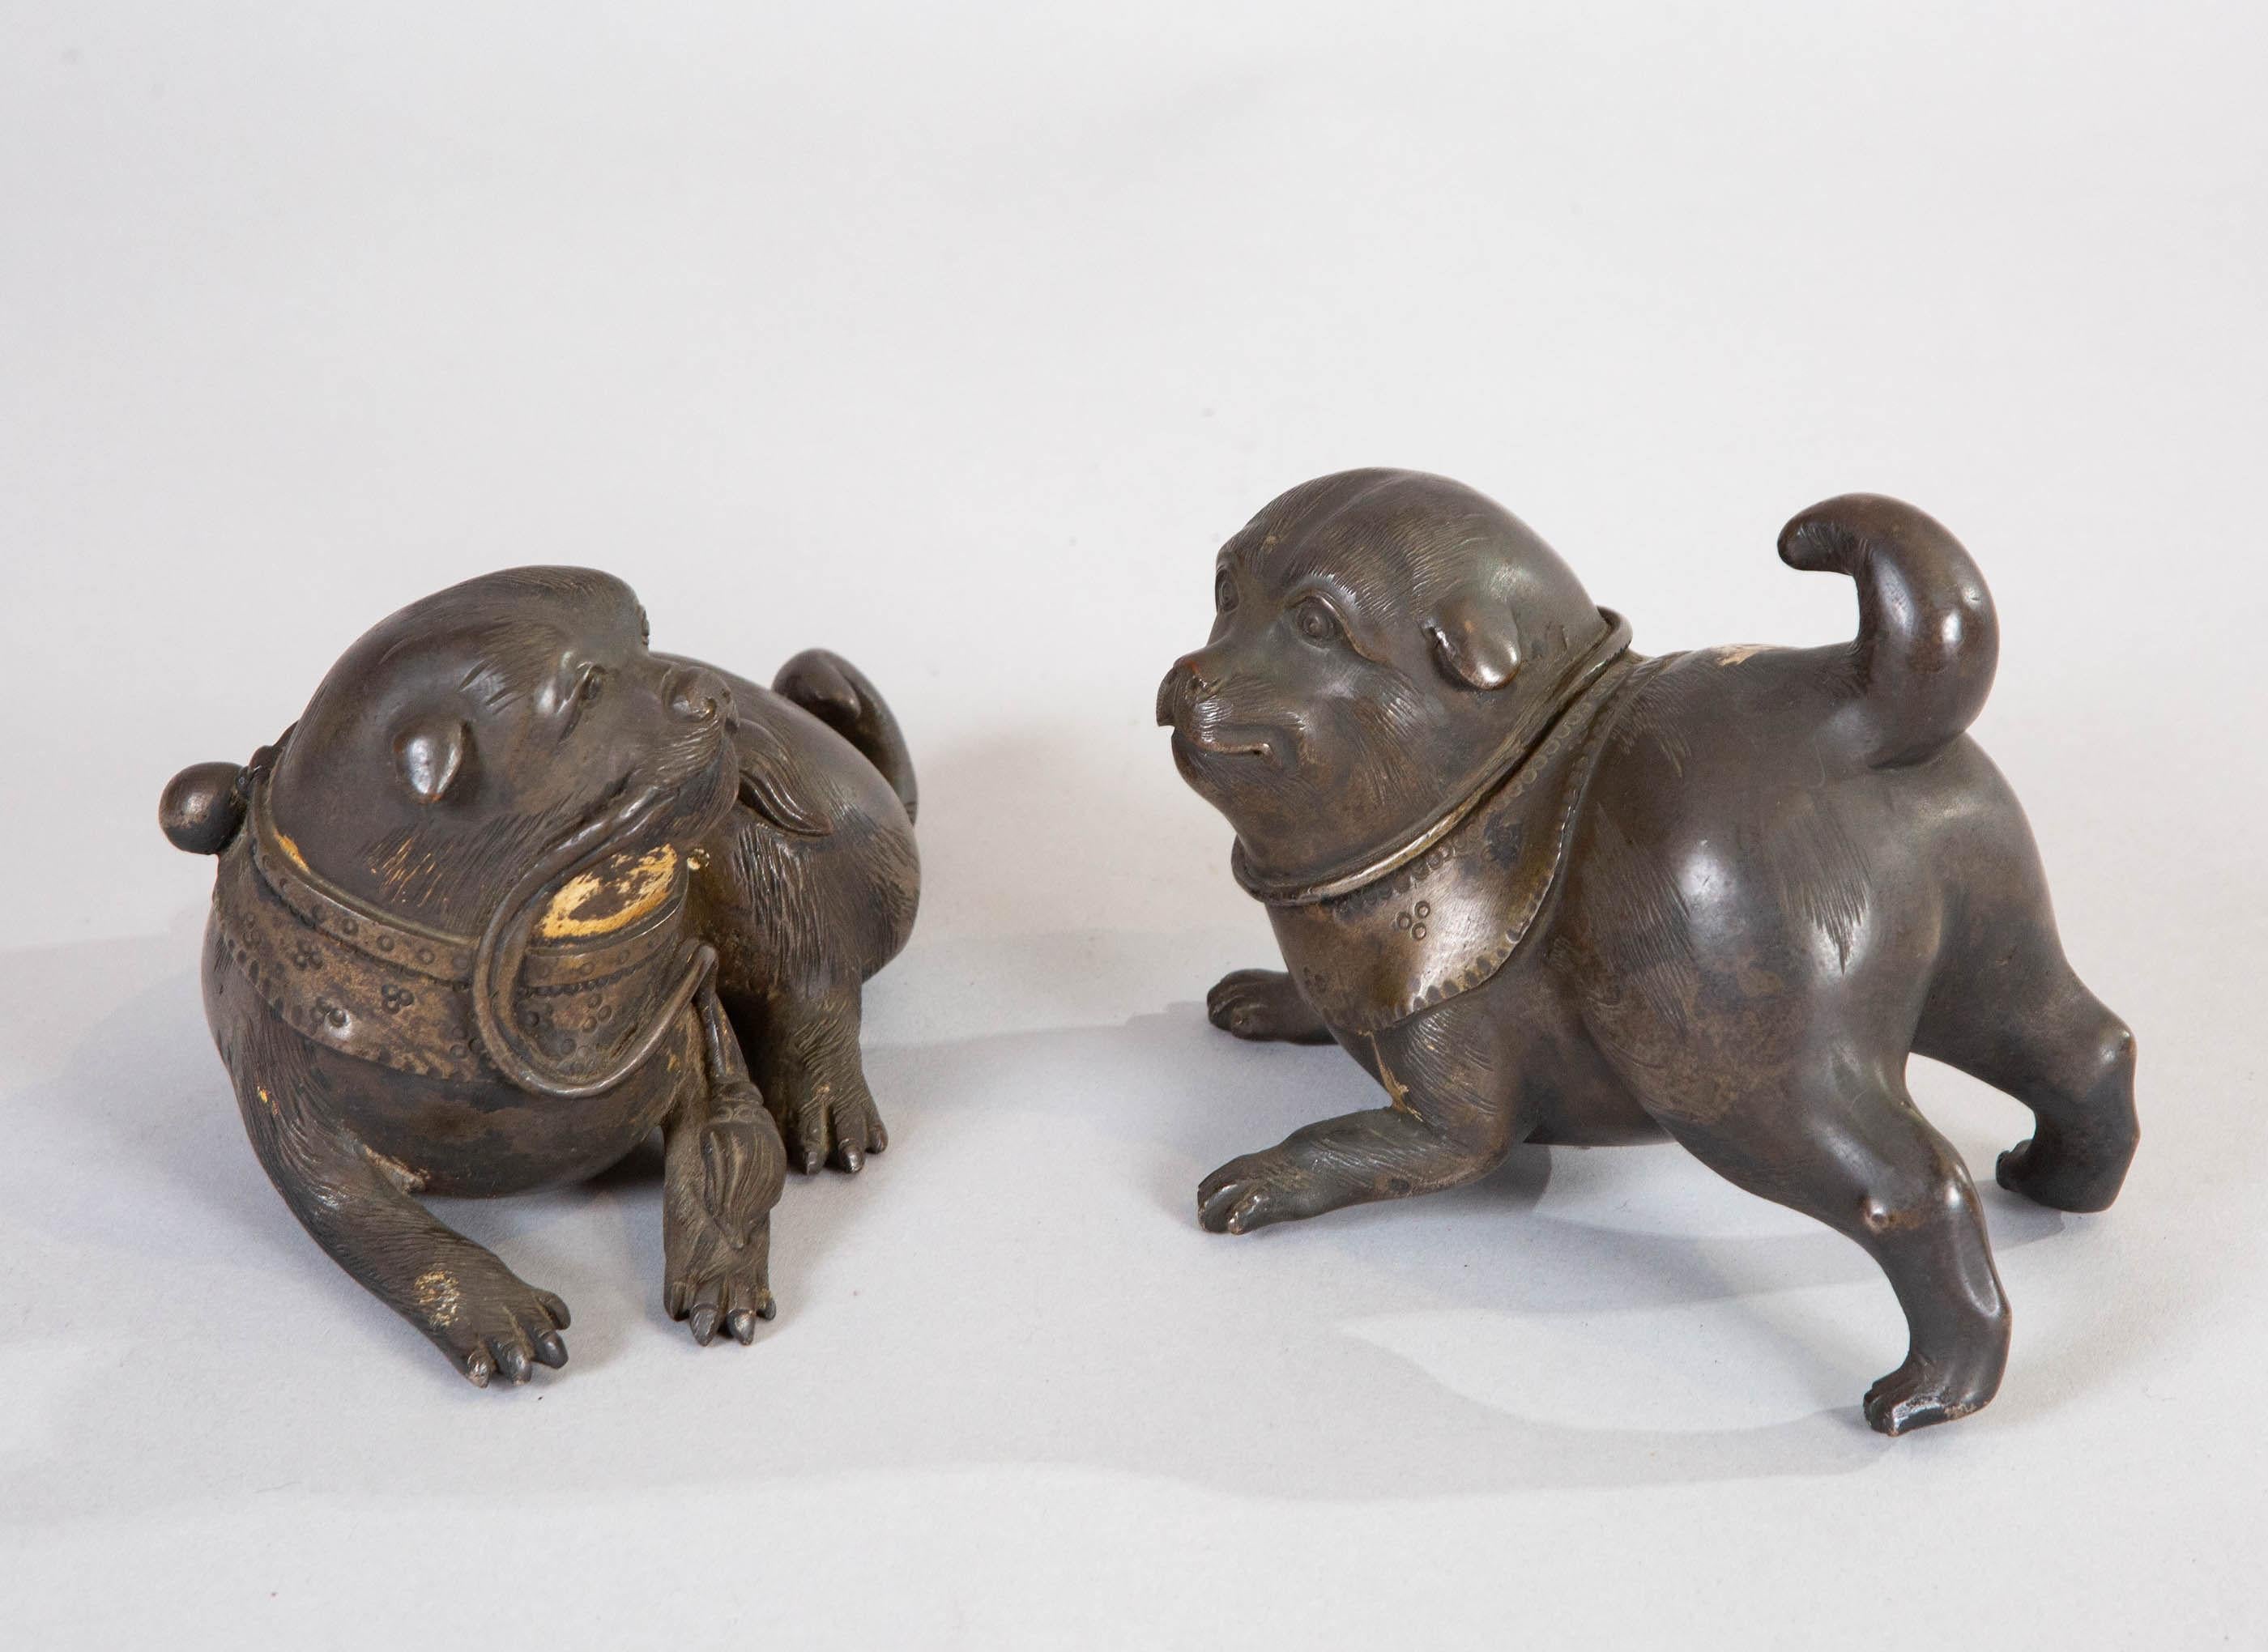 Antique bronze sculptures of puppies playing.  Traces of gold on both, one holding tassels in its mouth. Measurements: 3 1/2